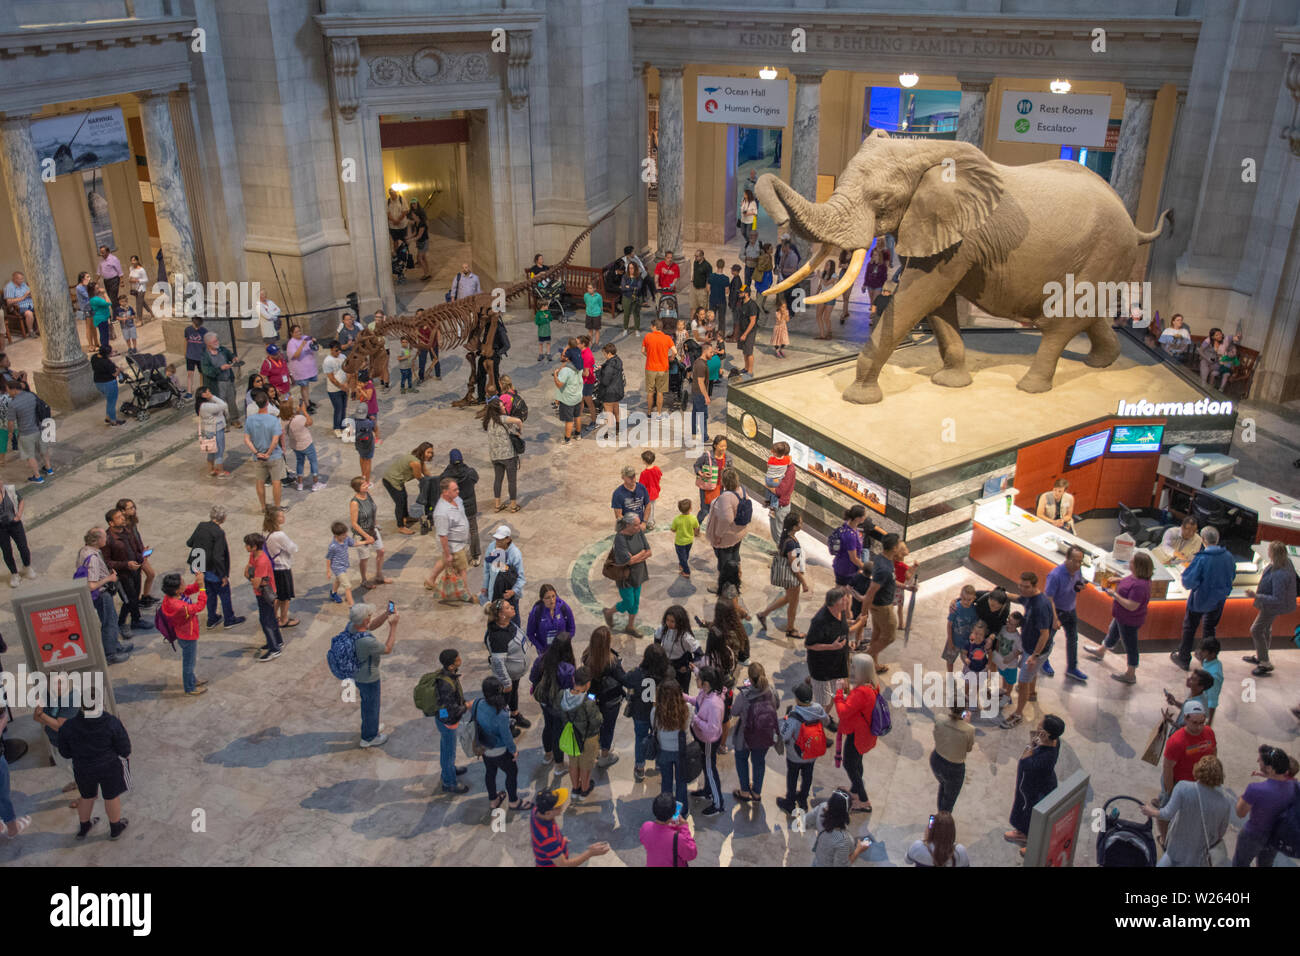 African elephant nicknamed 'Henry' seems to welcome visitors in the rotunda of the National Museum of Natural History in Washington, DC. Stock Photo